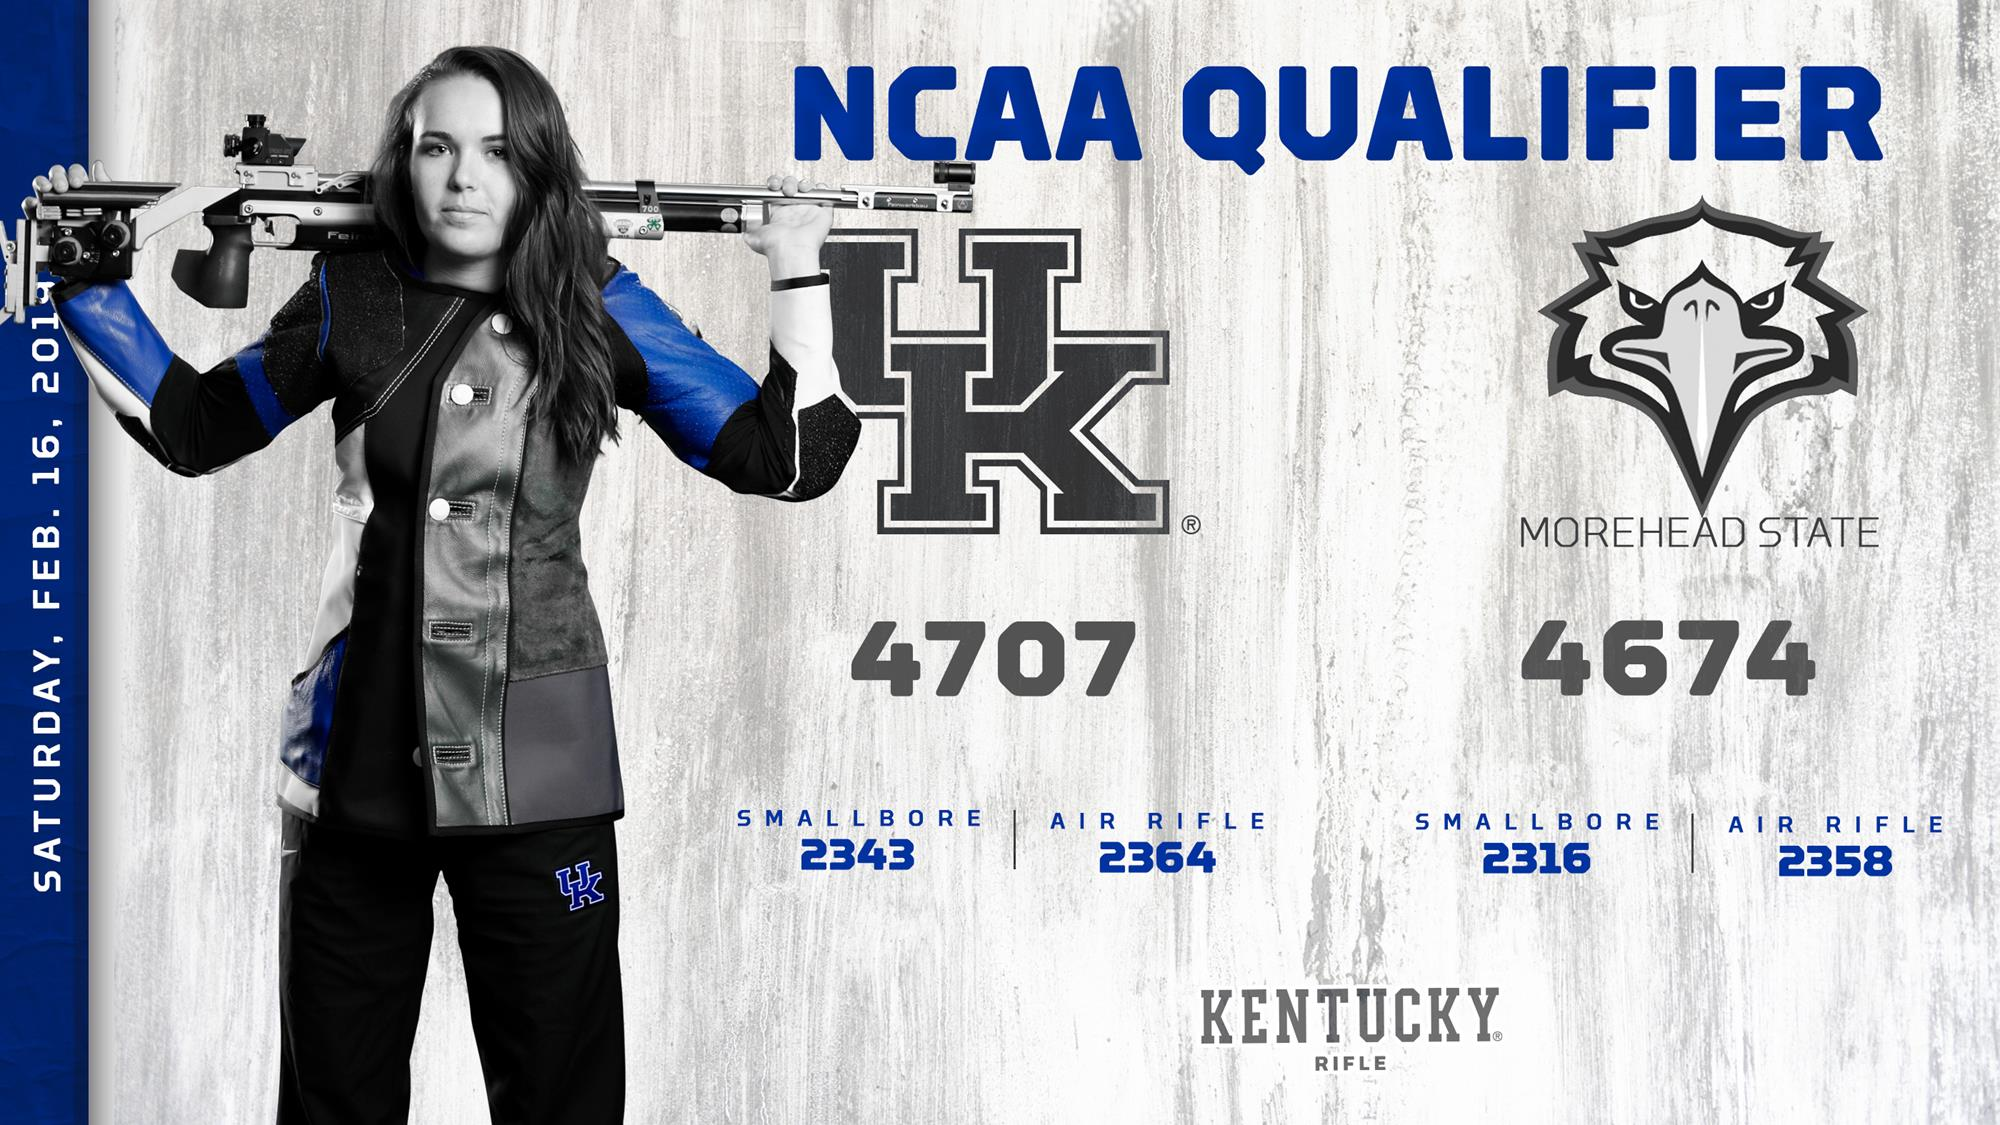 UK Rifle Fires 4707 at NCAA Qualifier Saturday